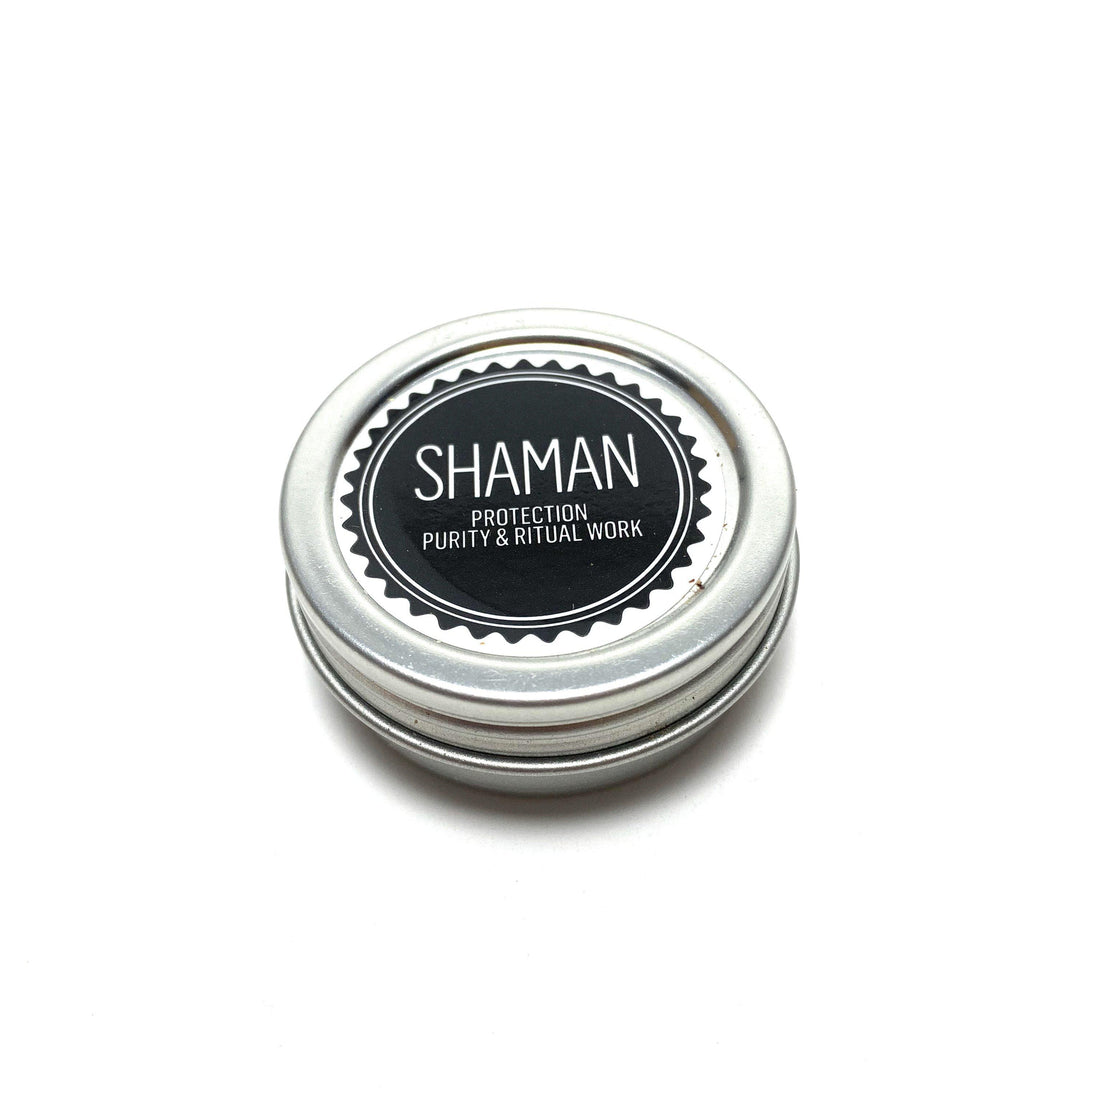 Shaman Incense Blend HOI Incense Blend House of Intuition $6.00 Tiny Tin .5 oz 